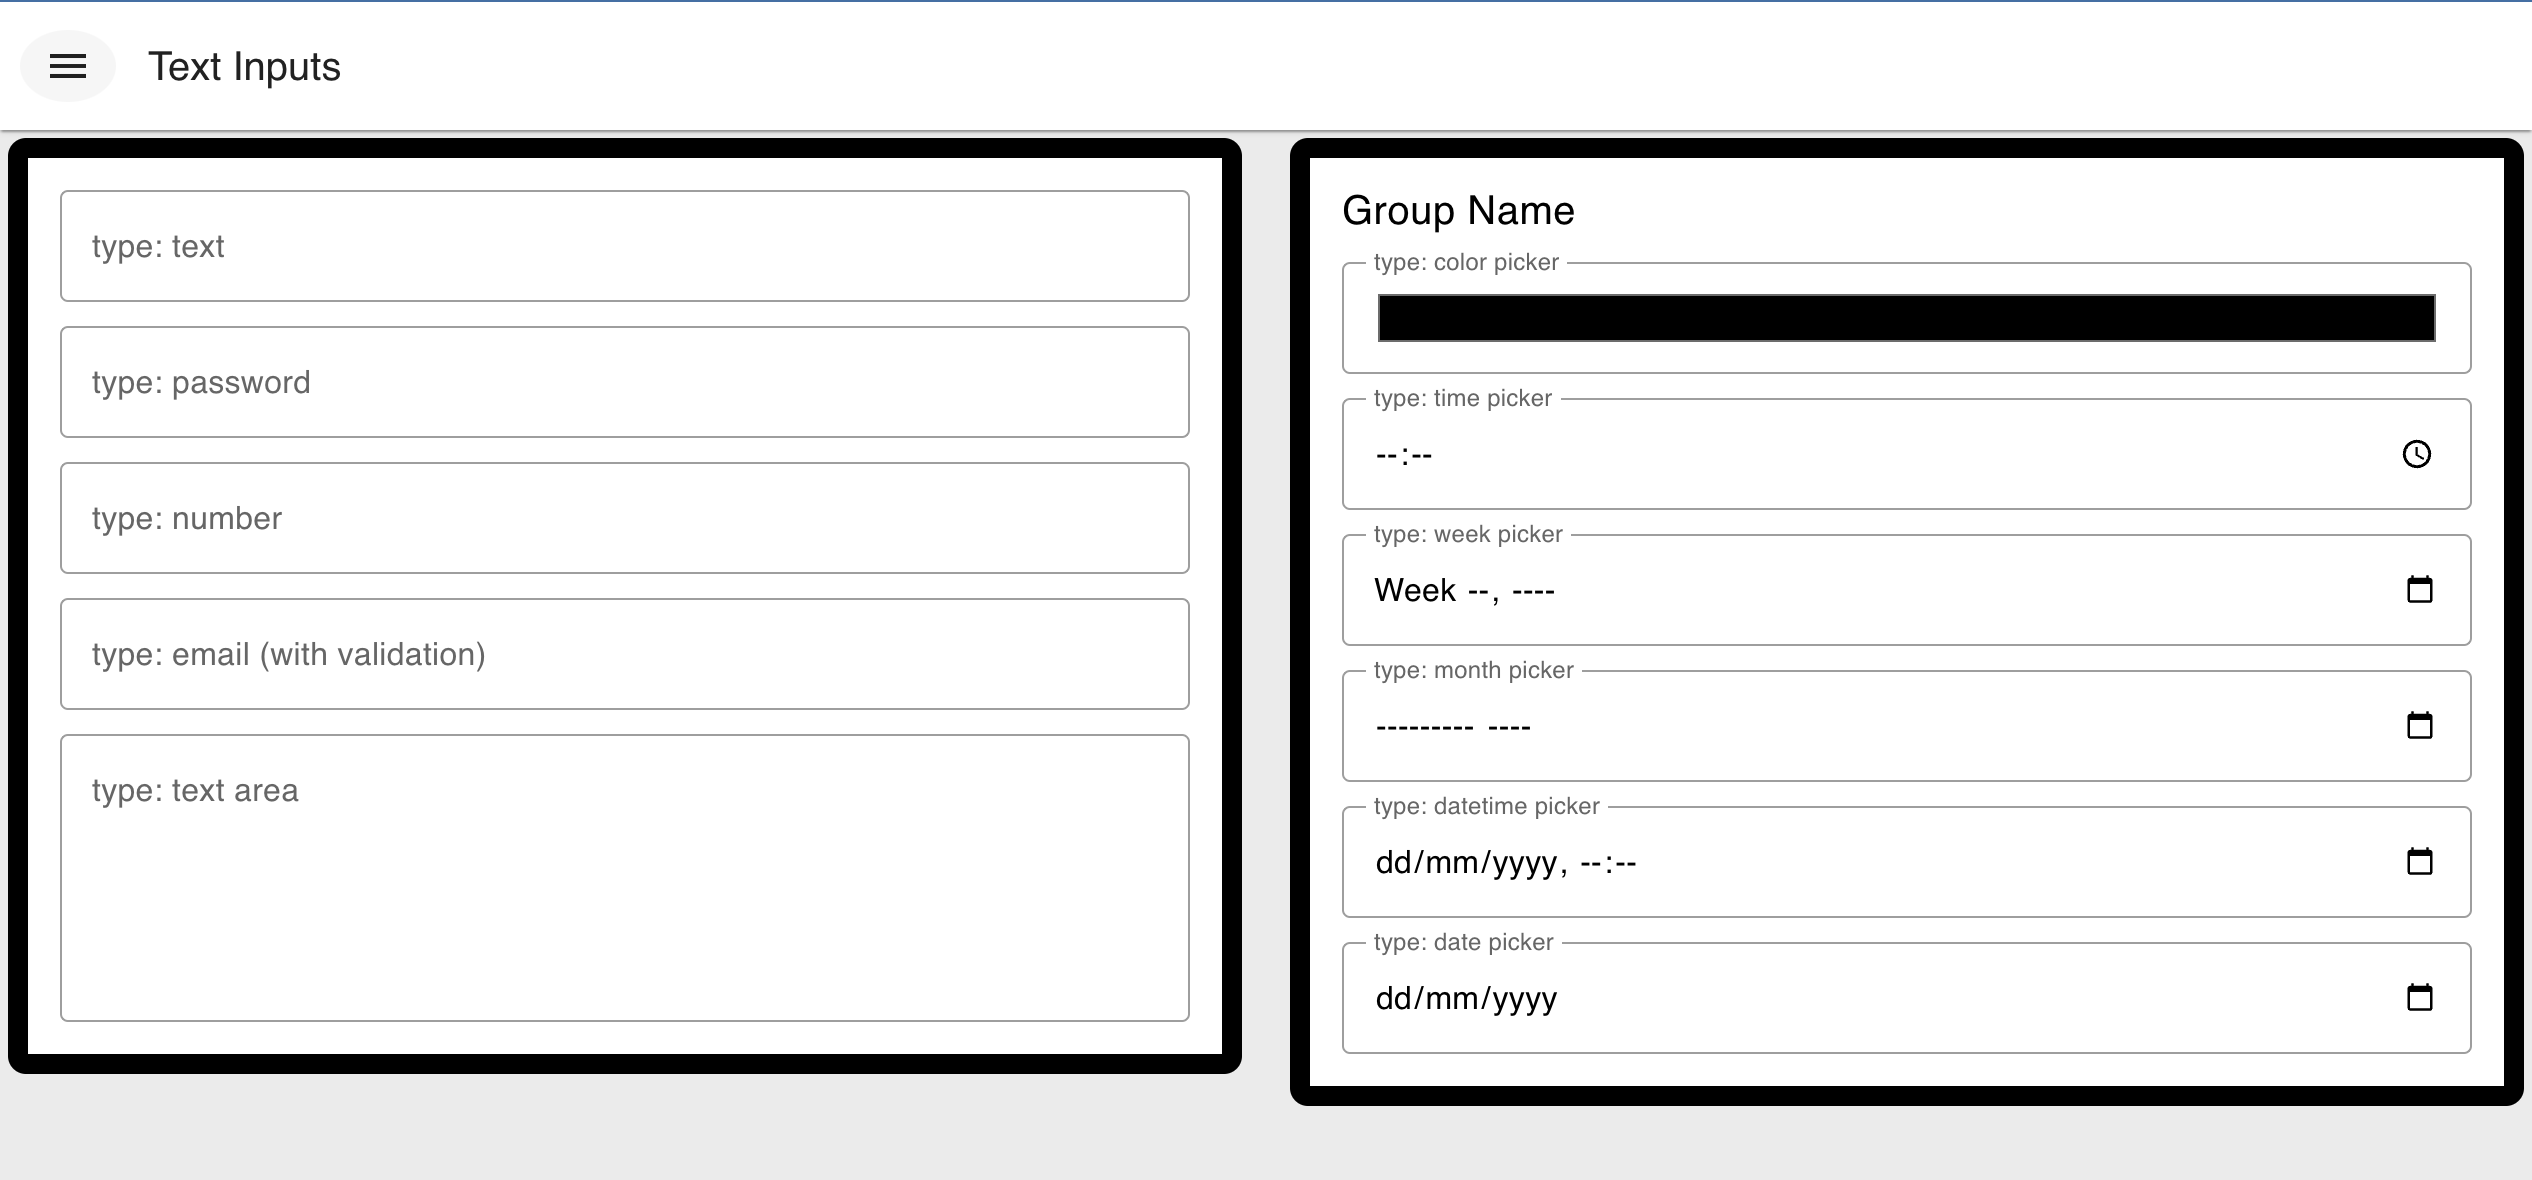 Example of styling applied to the Groups rendered in Dashboard 2.0